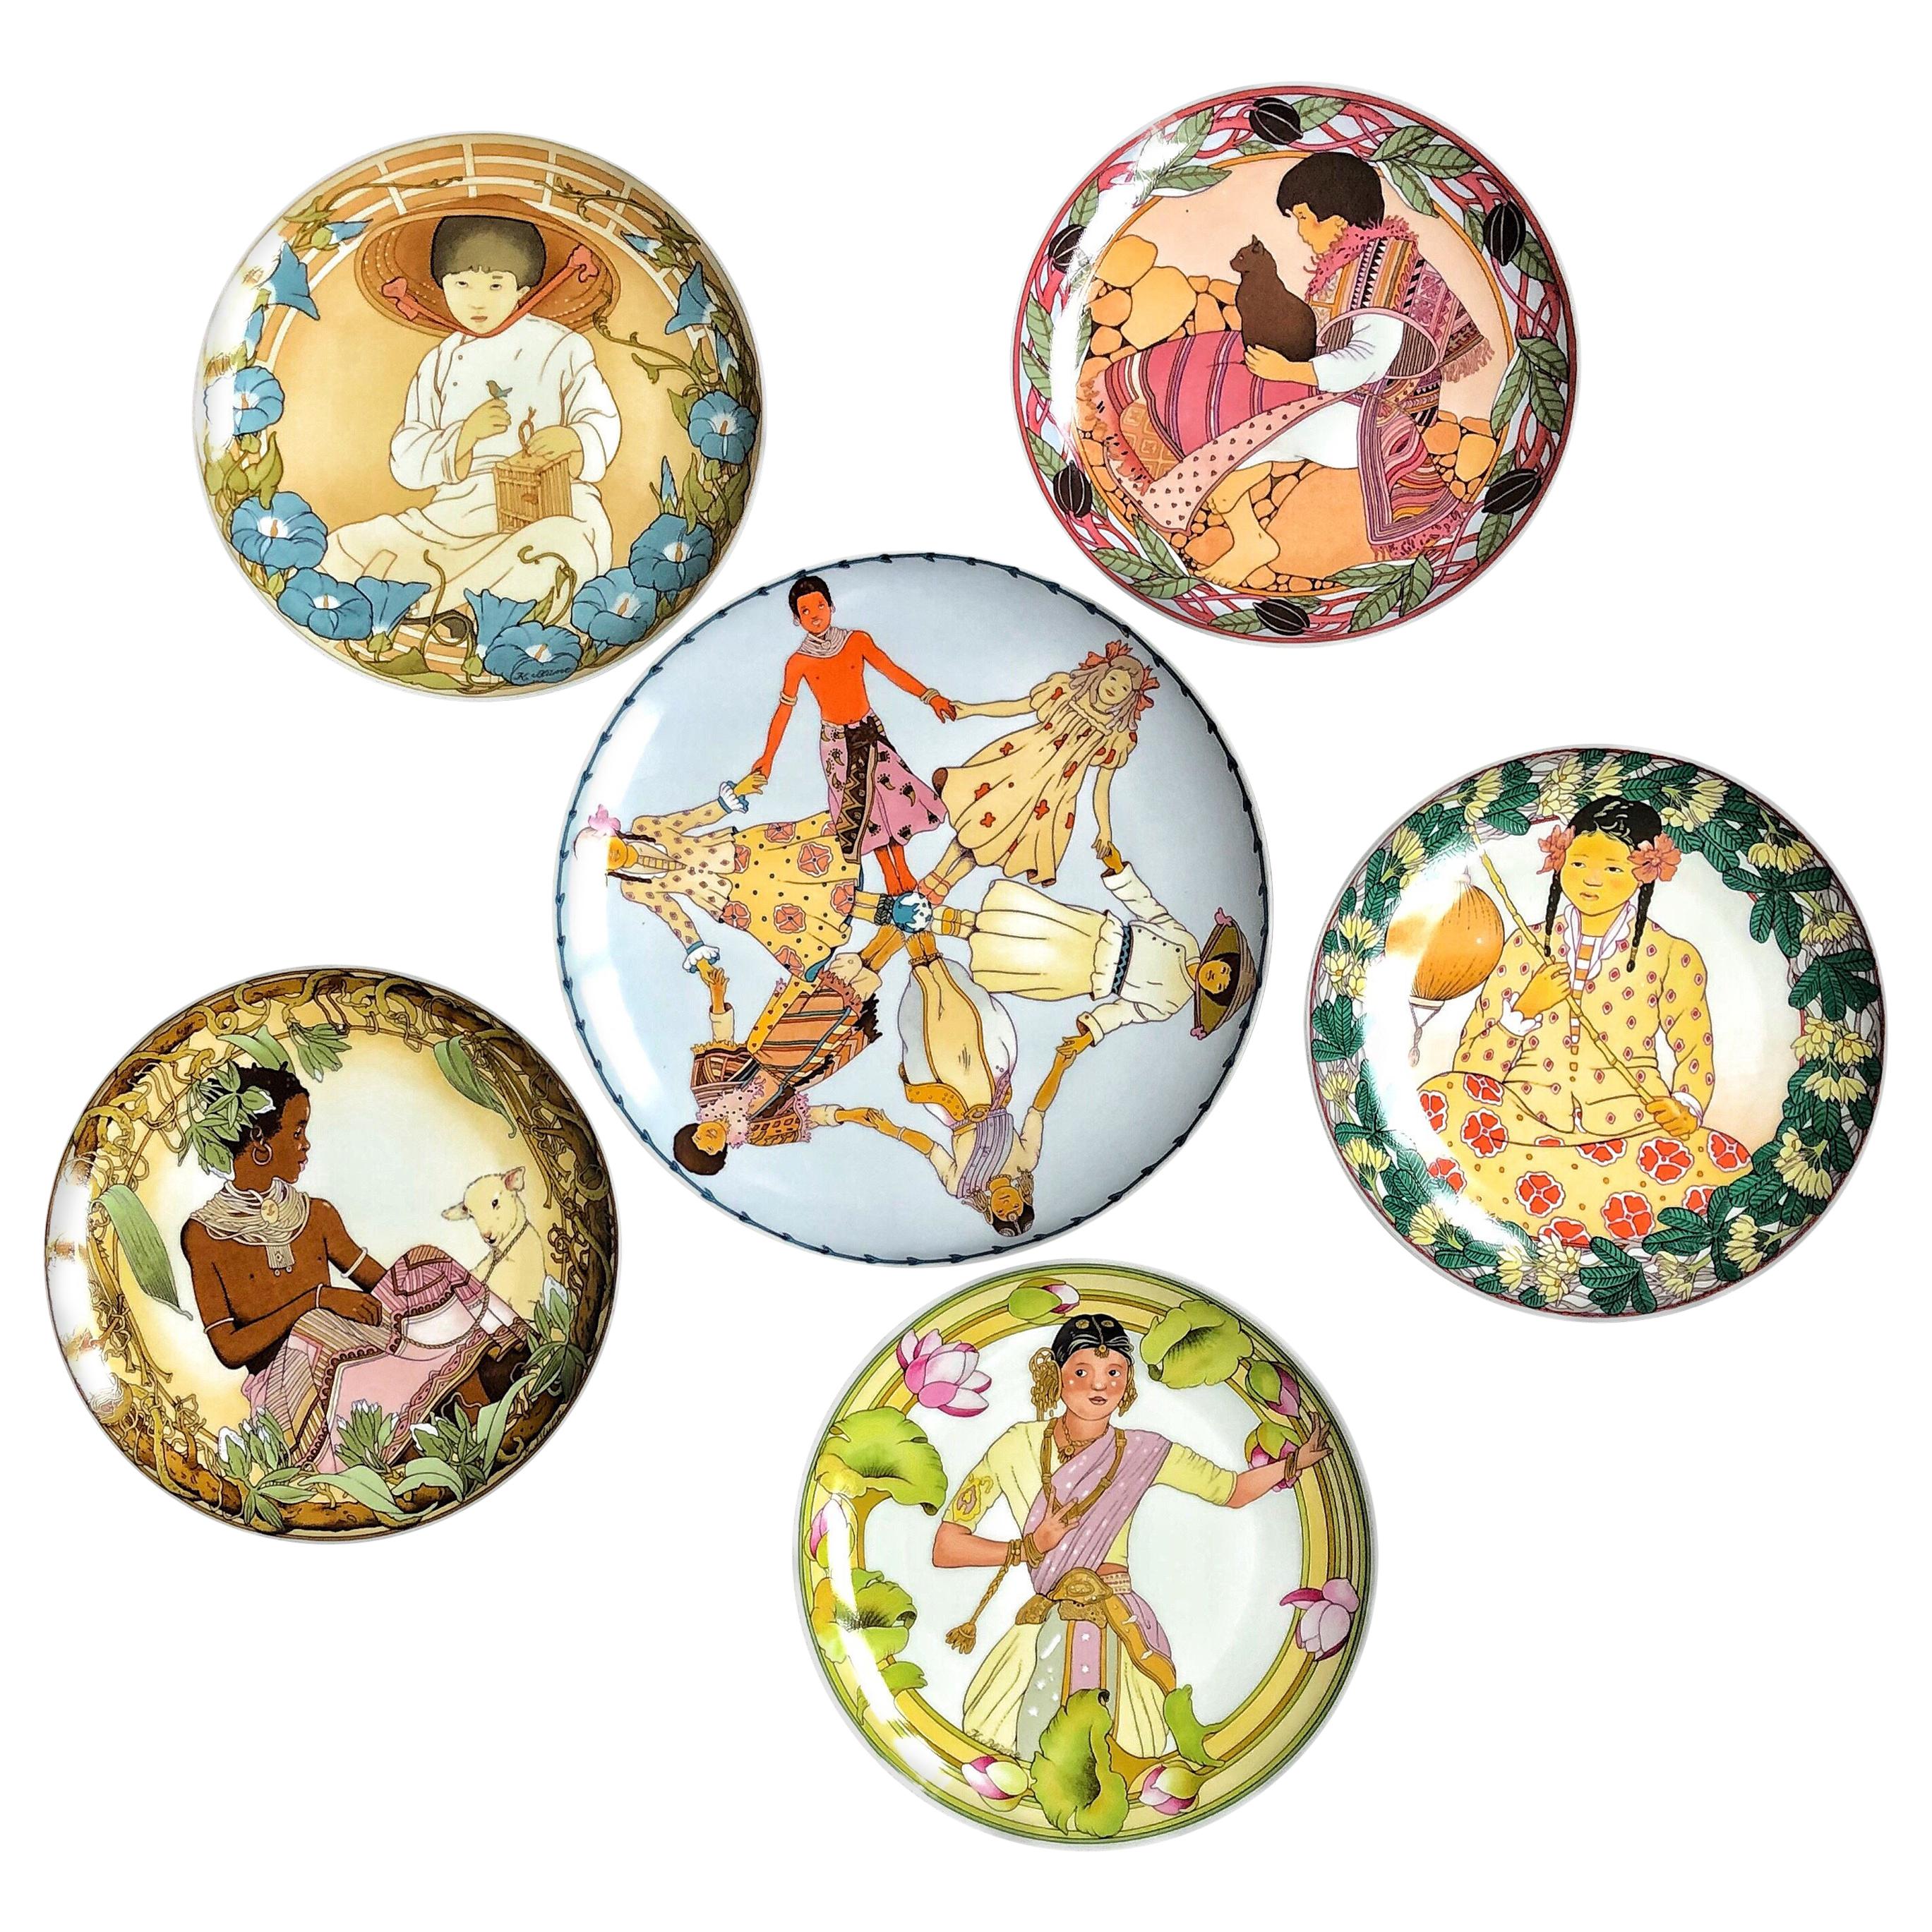 6 Plates “Children of the World” Villeroy & Boch 1979 for Unicef, Germany SALE 